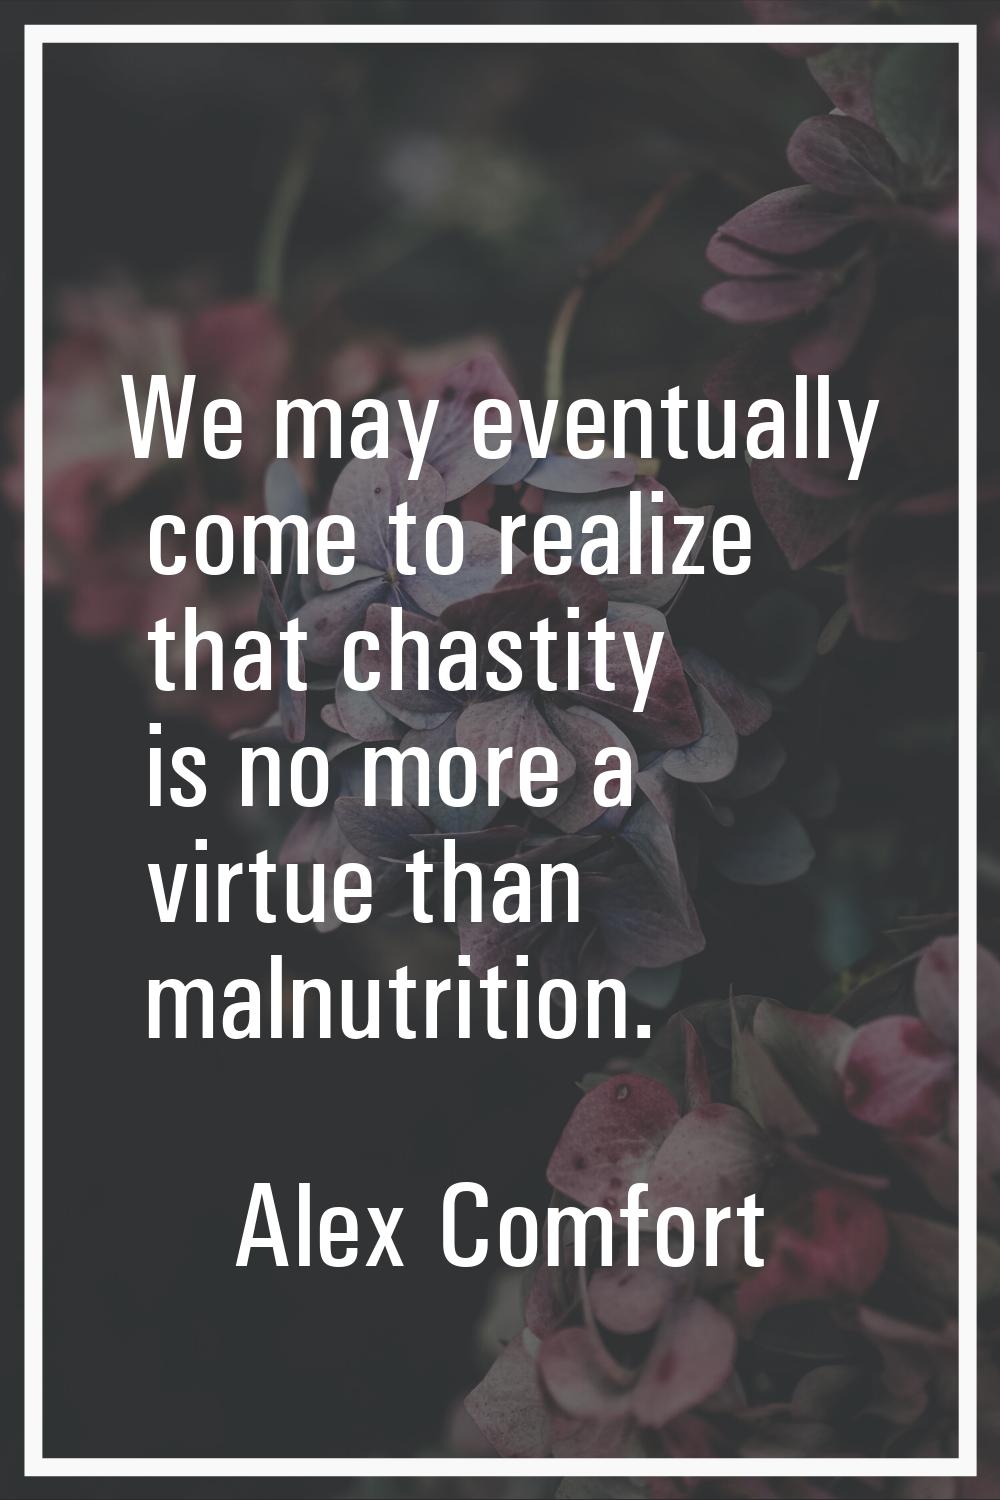 We may eventually come to realize that chastity is no more a virtue than malnutrition.